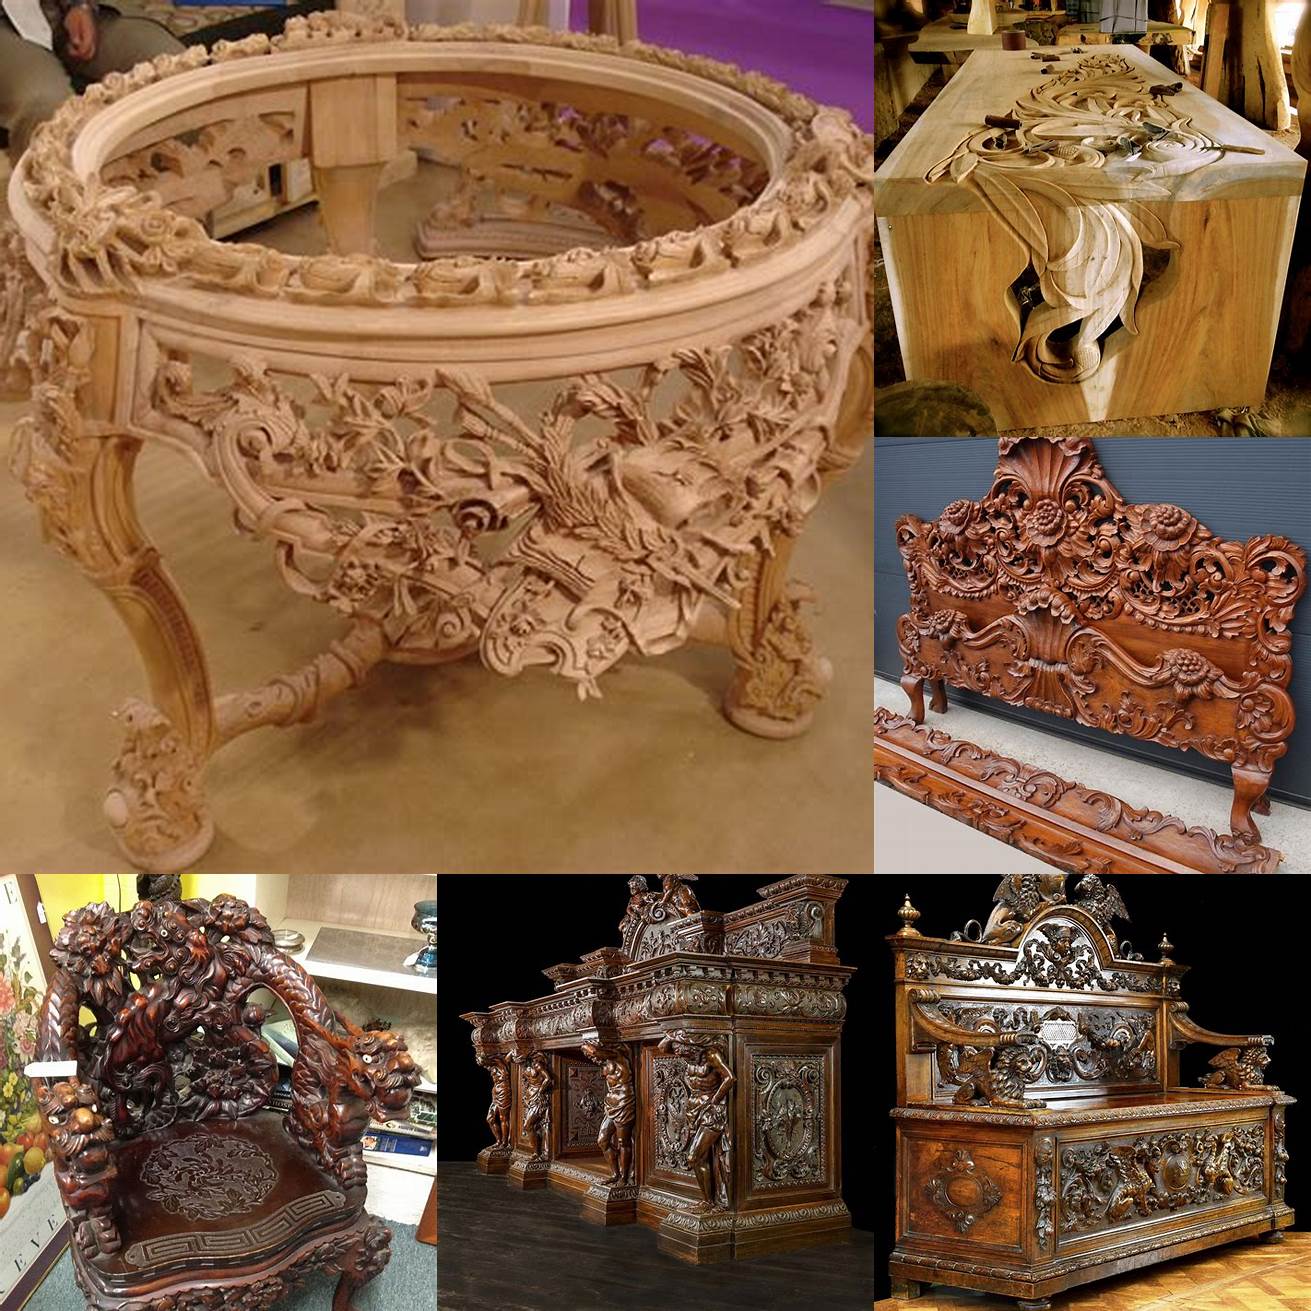 Furniture with Carvings